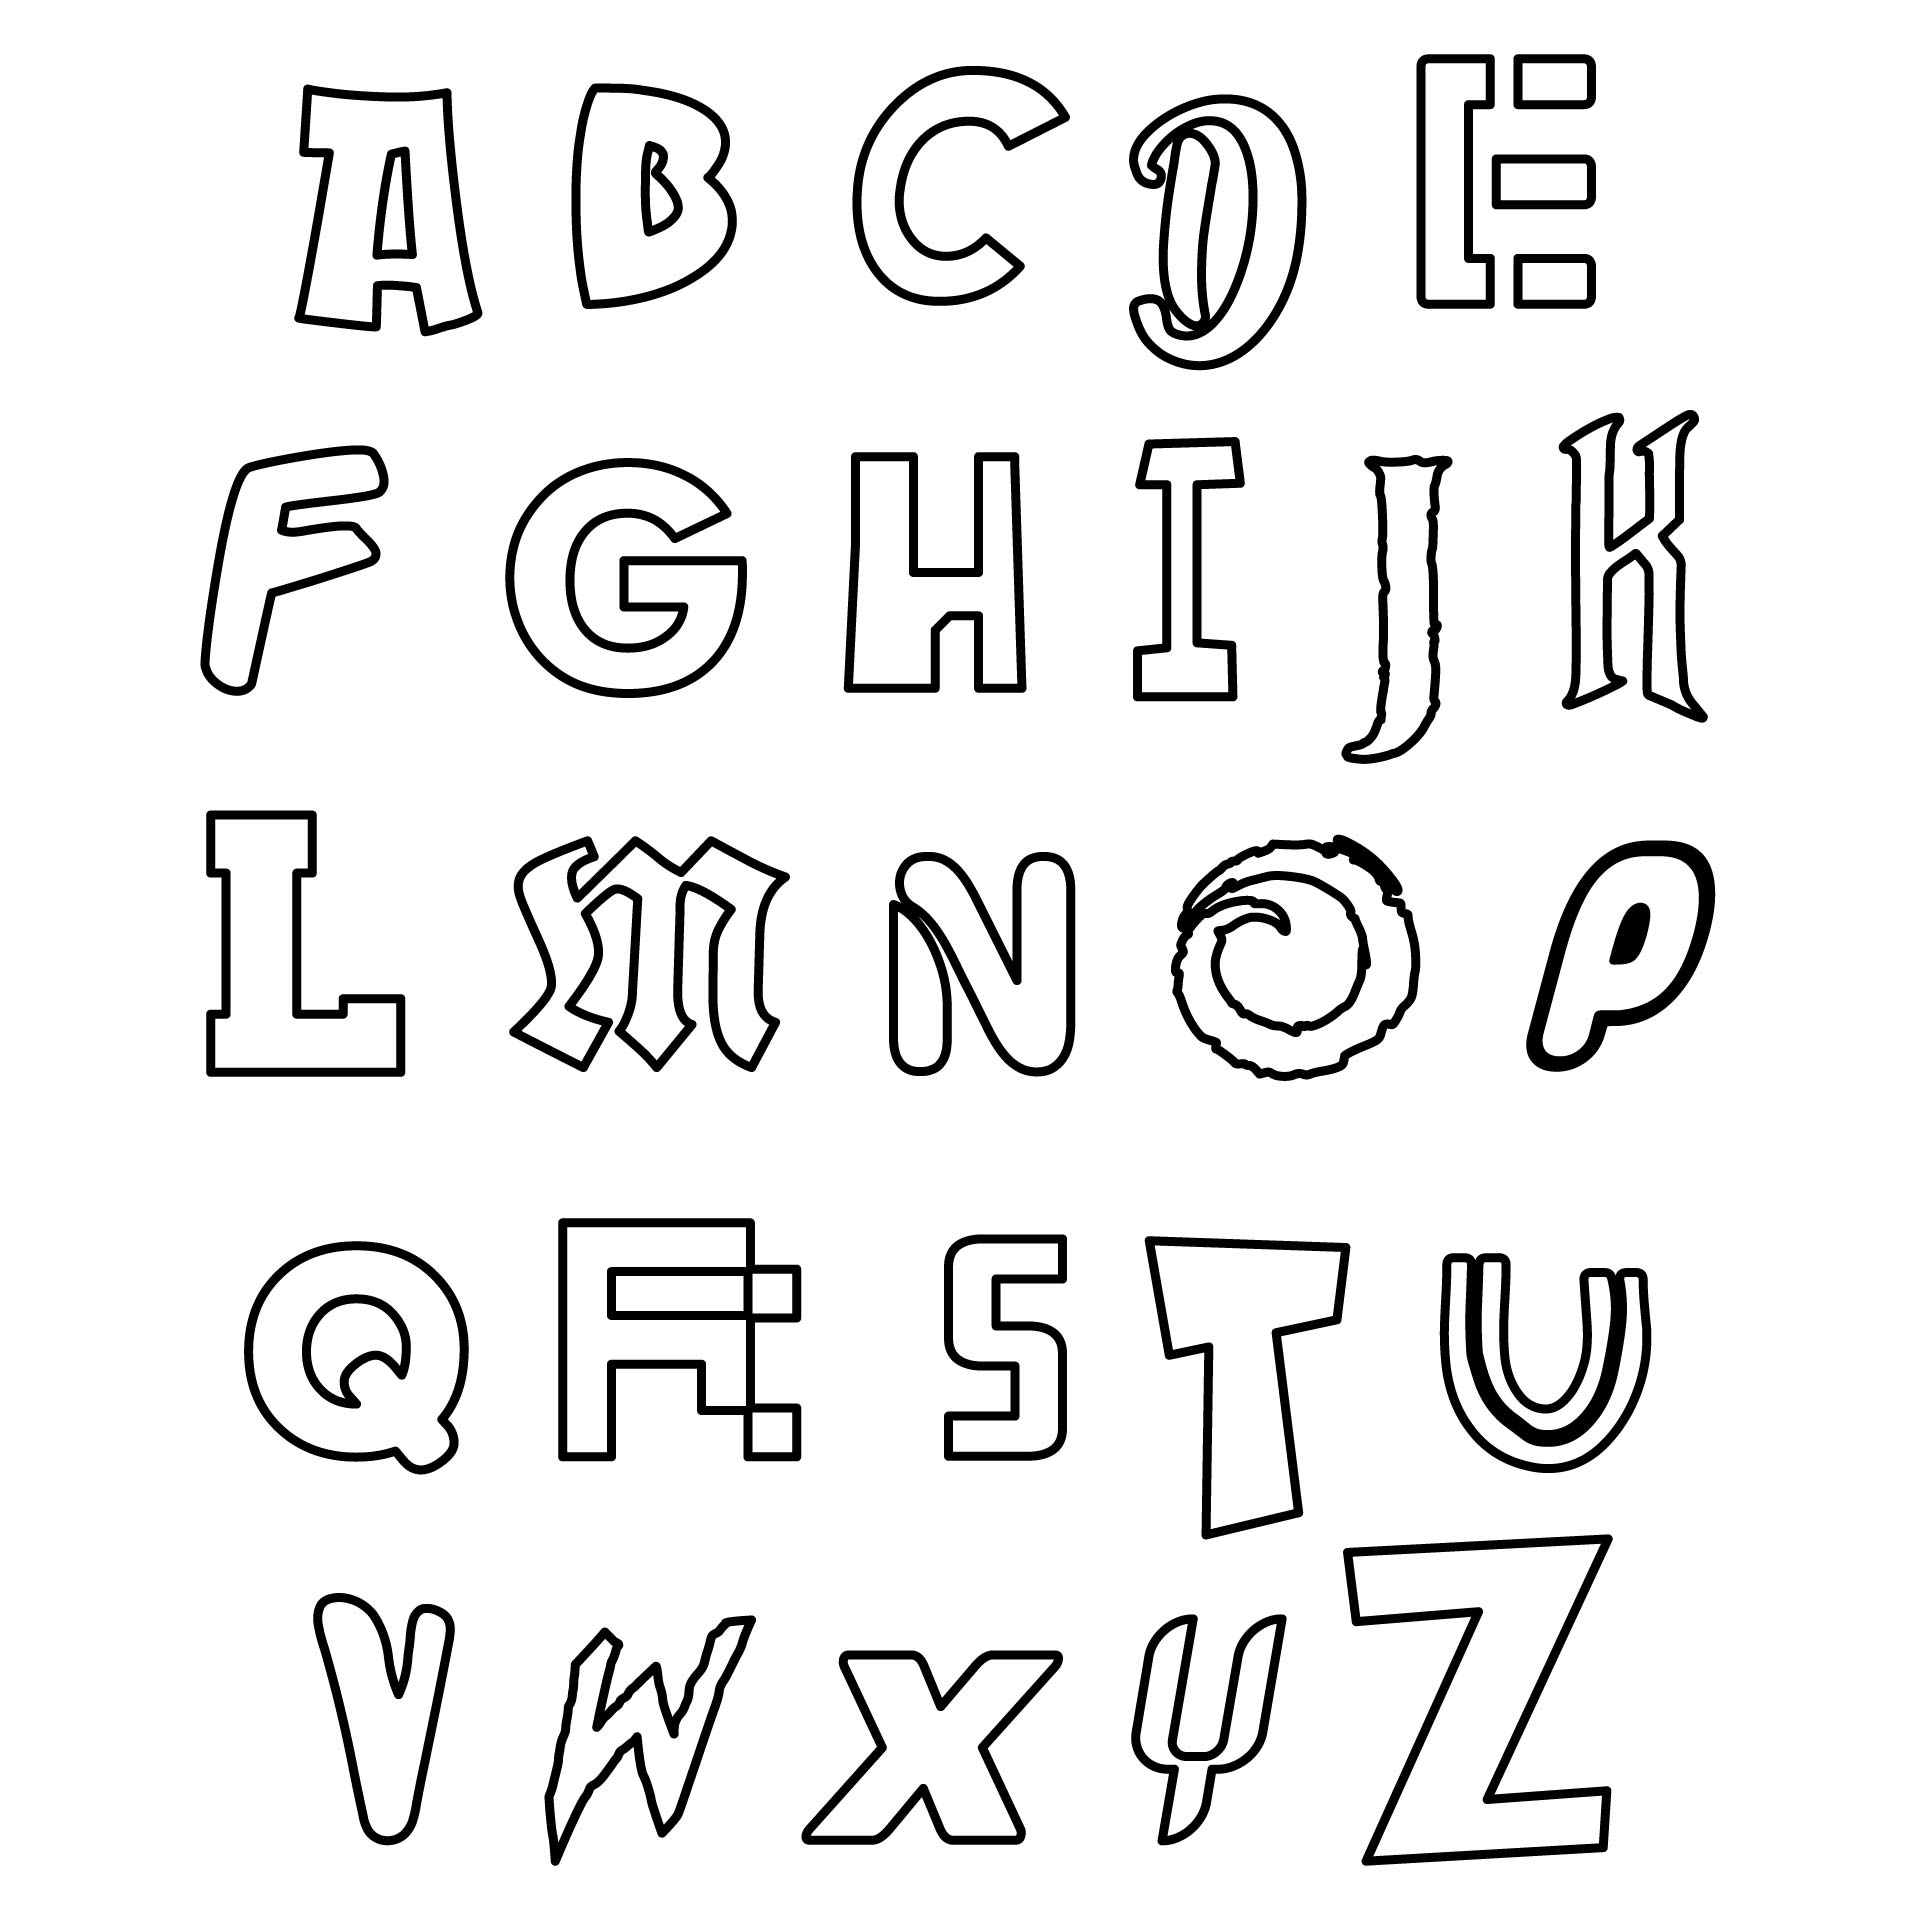 Letter I Coloring Pages - 10 Free PDF Printables | Printablee